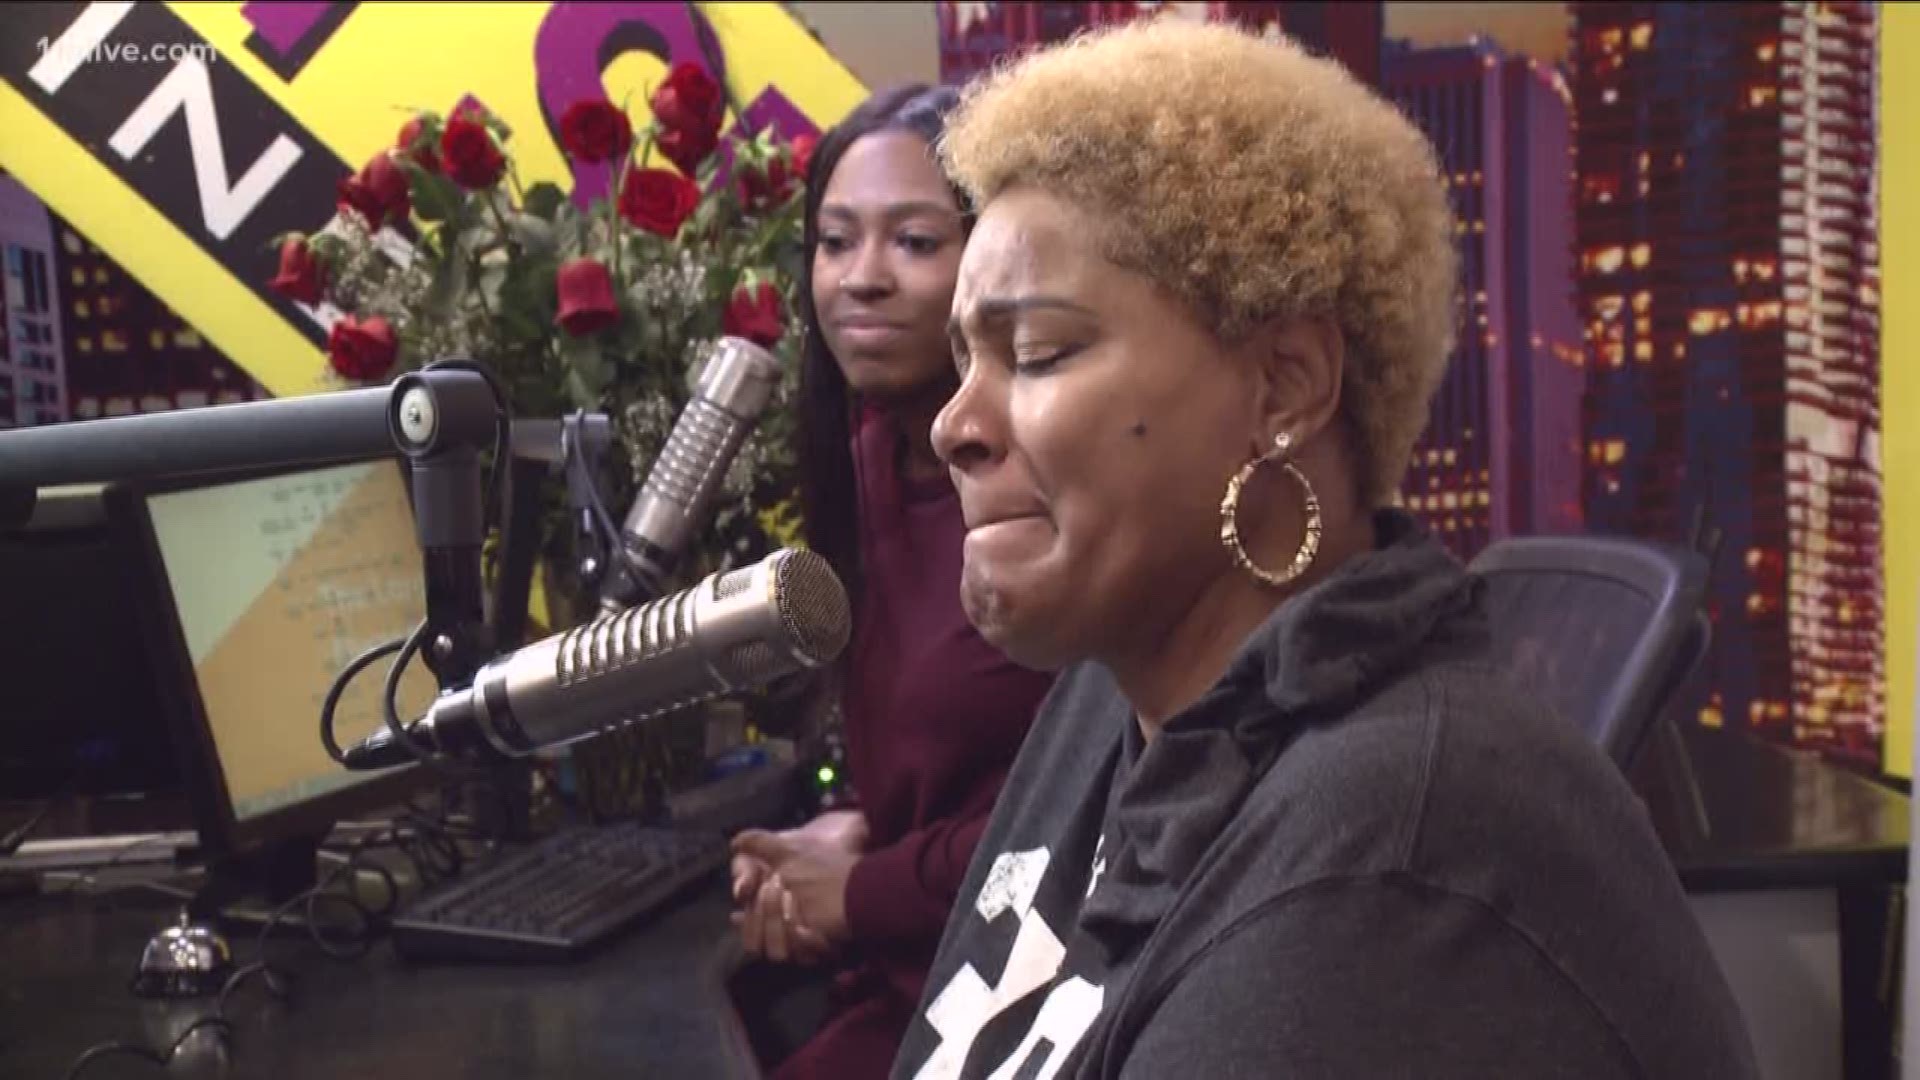 11Alive was the only station that captured the grand surprise at the Willie Moore Jr. Show on Praise 102.5, when they presented her with a check for $1,650.